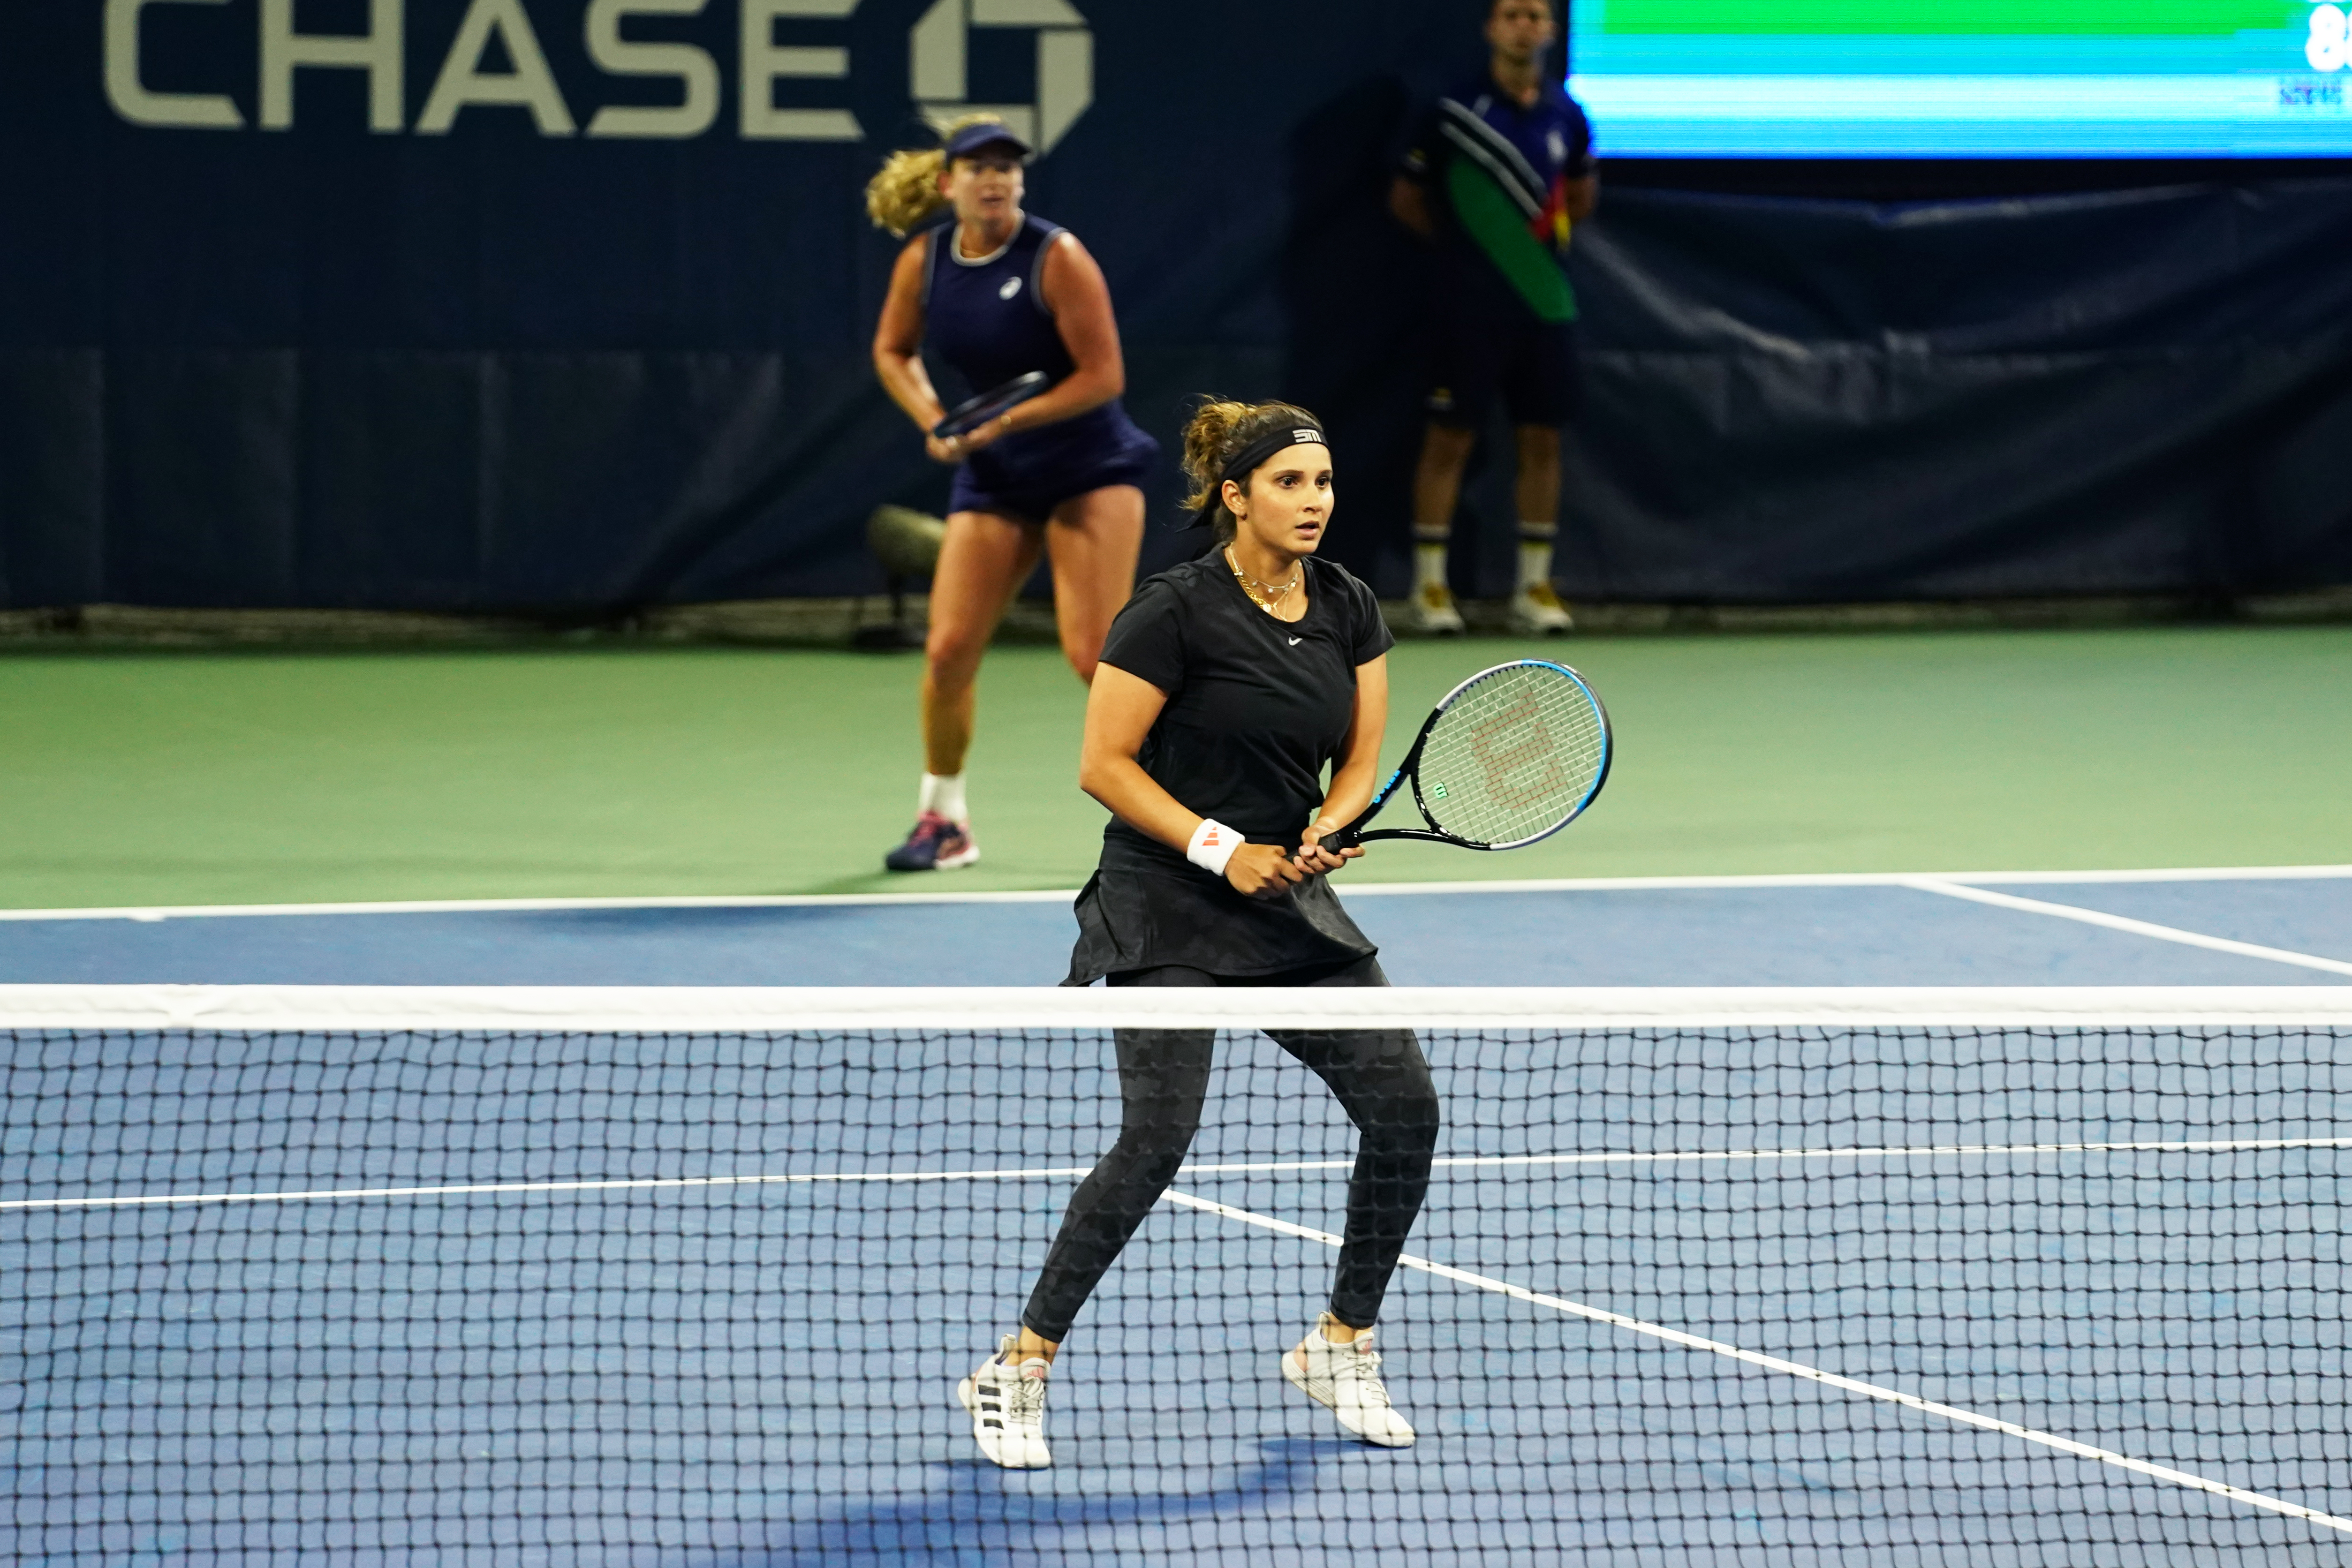 “We had our chances and we didn’t take them” – Sania Mirza on her R1 loss in US Open Women’s Doubles